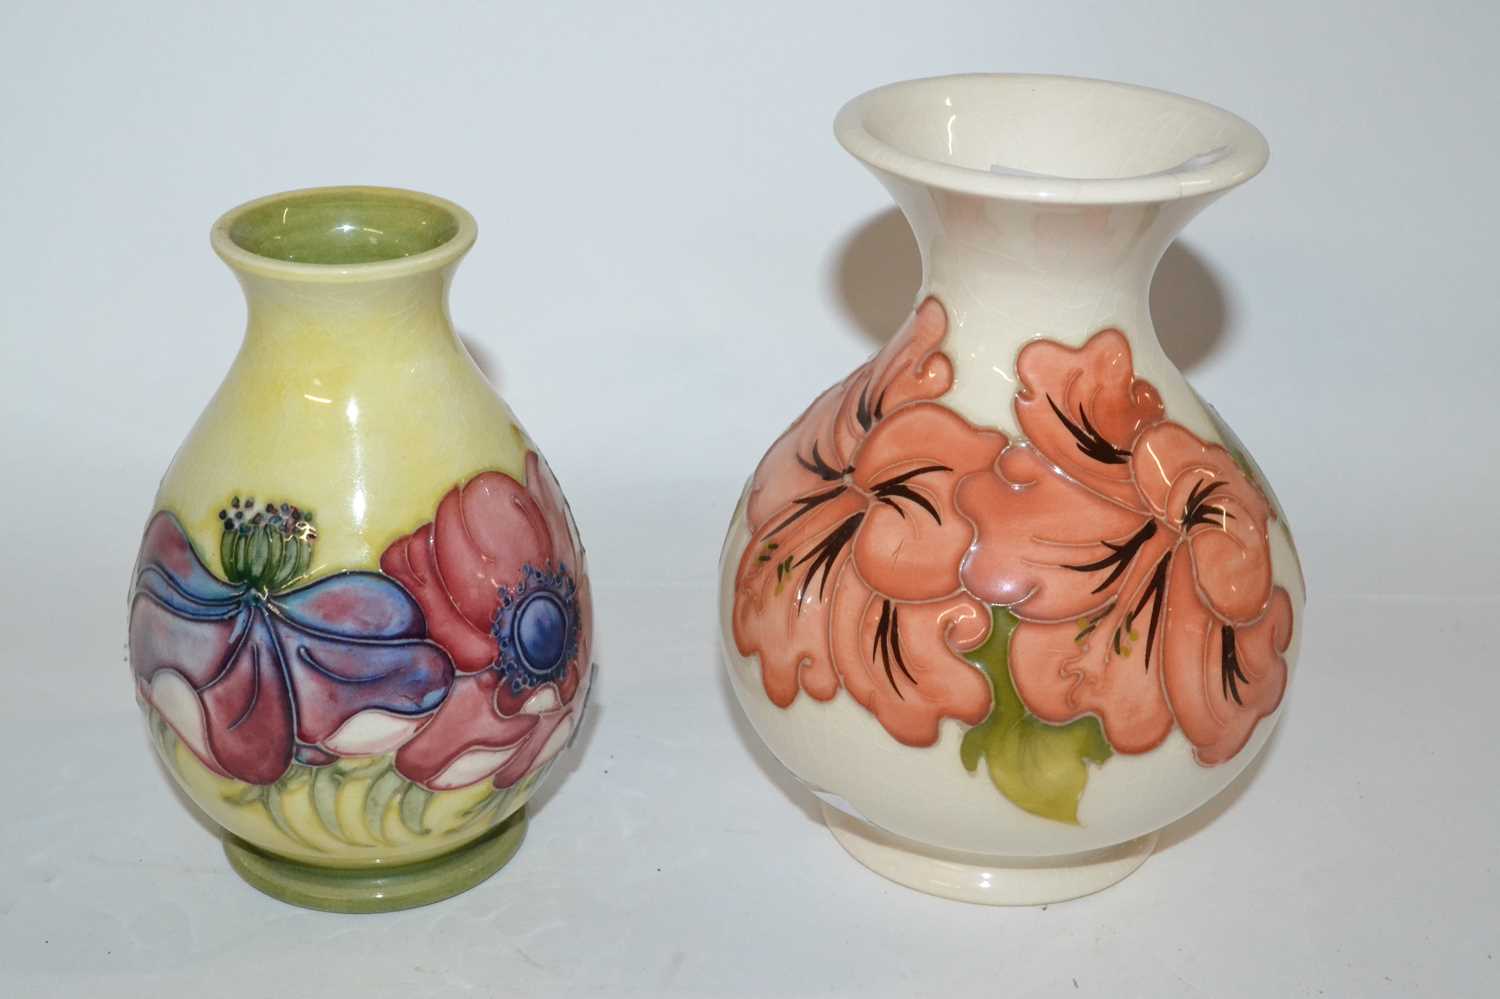 A Moorcroft vase of small baluster form, the yellow ground with tubelined anemone design with - Image 2 of 4